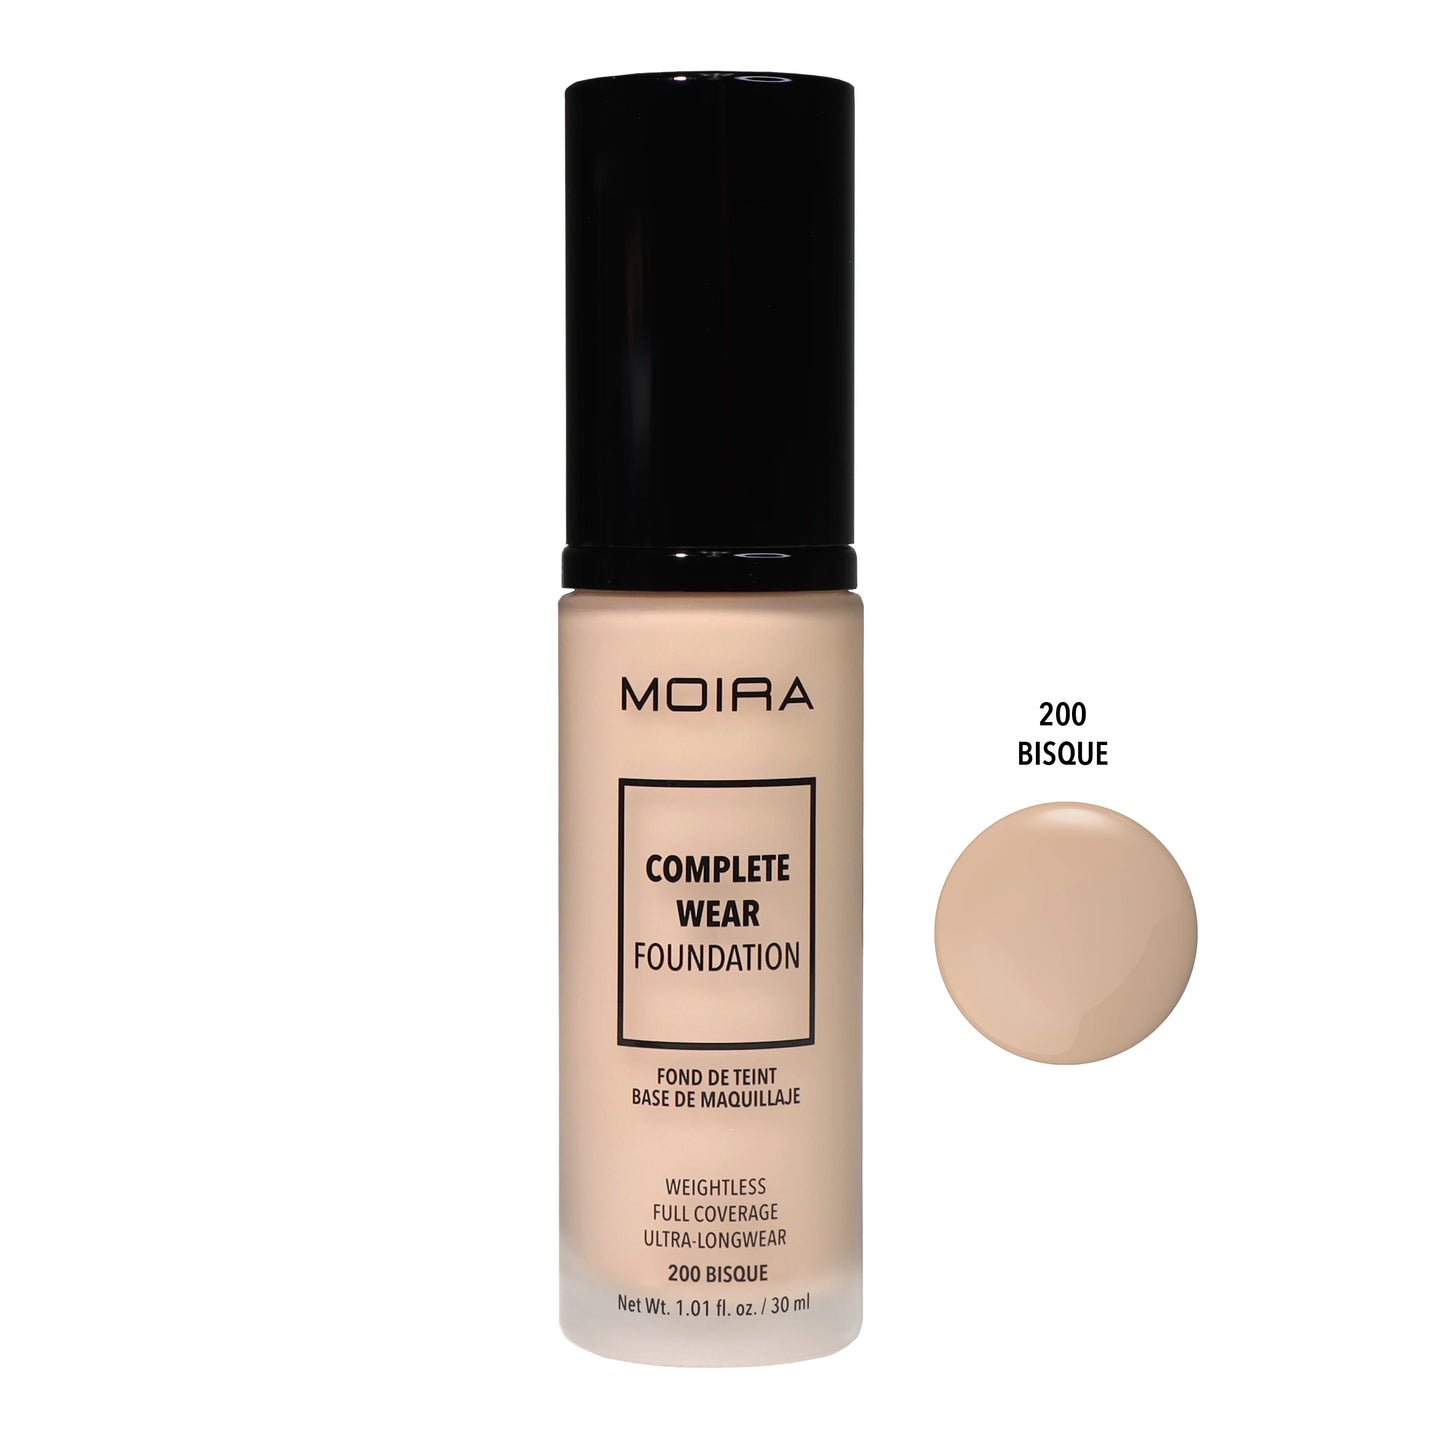 MOIRA Complete Wear™ Foundation 200 (BISQUE)